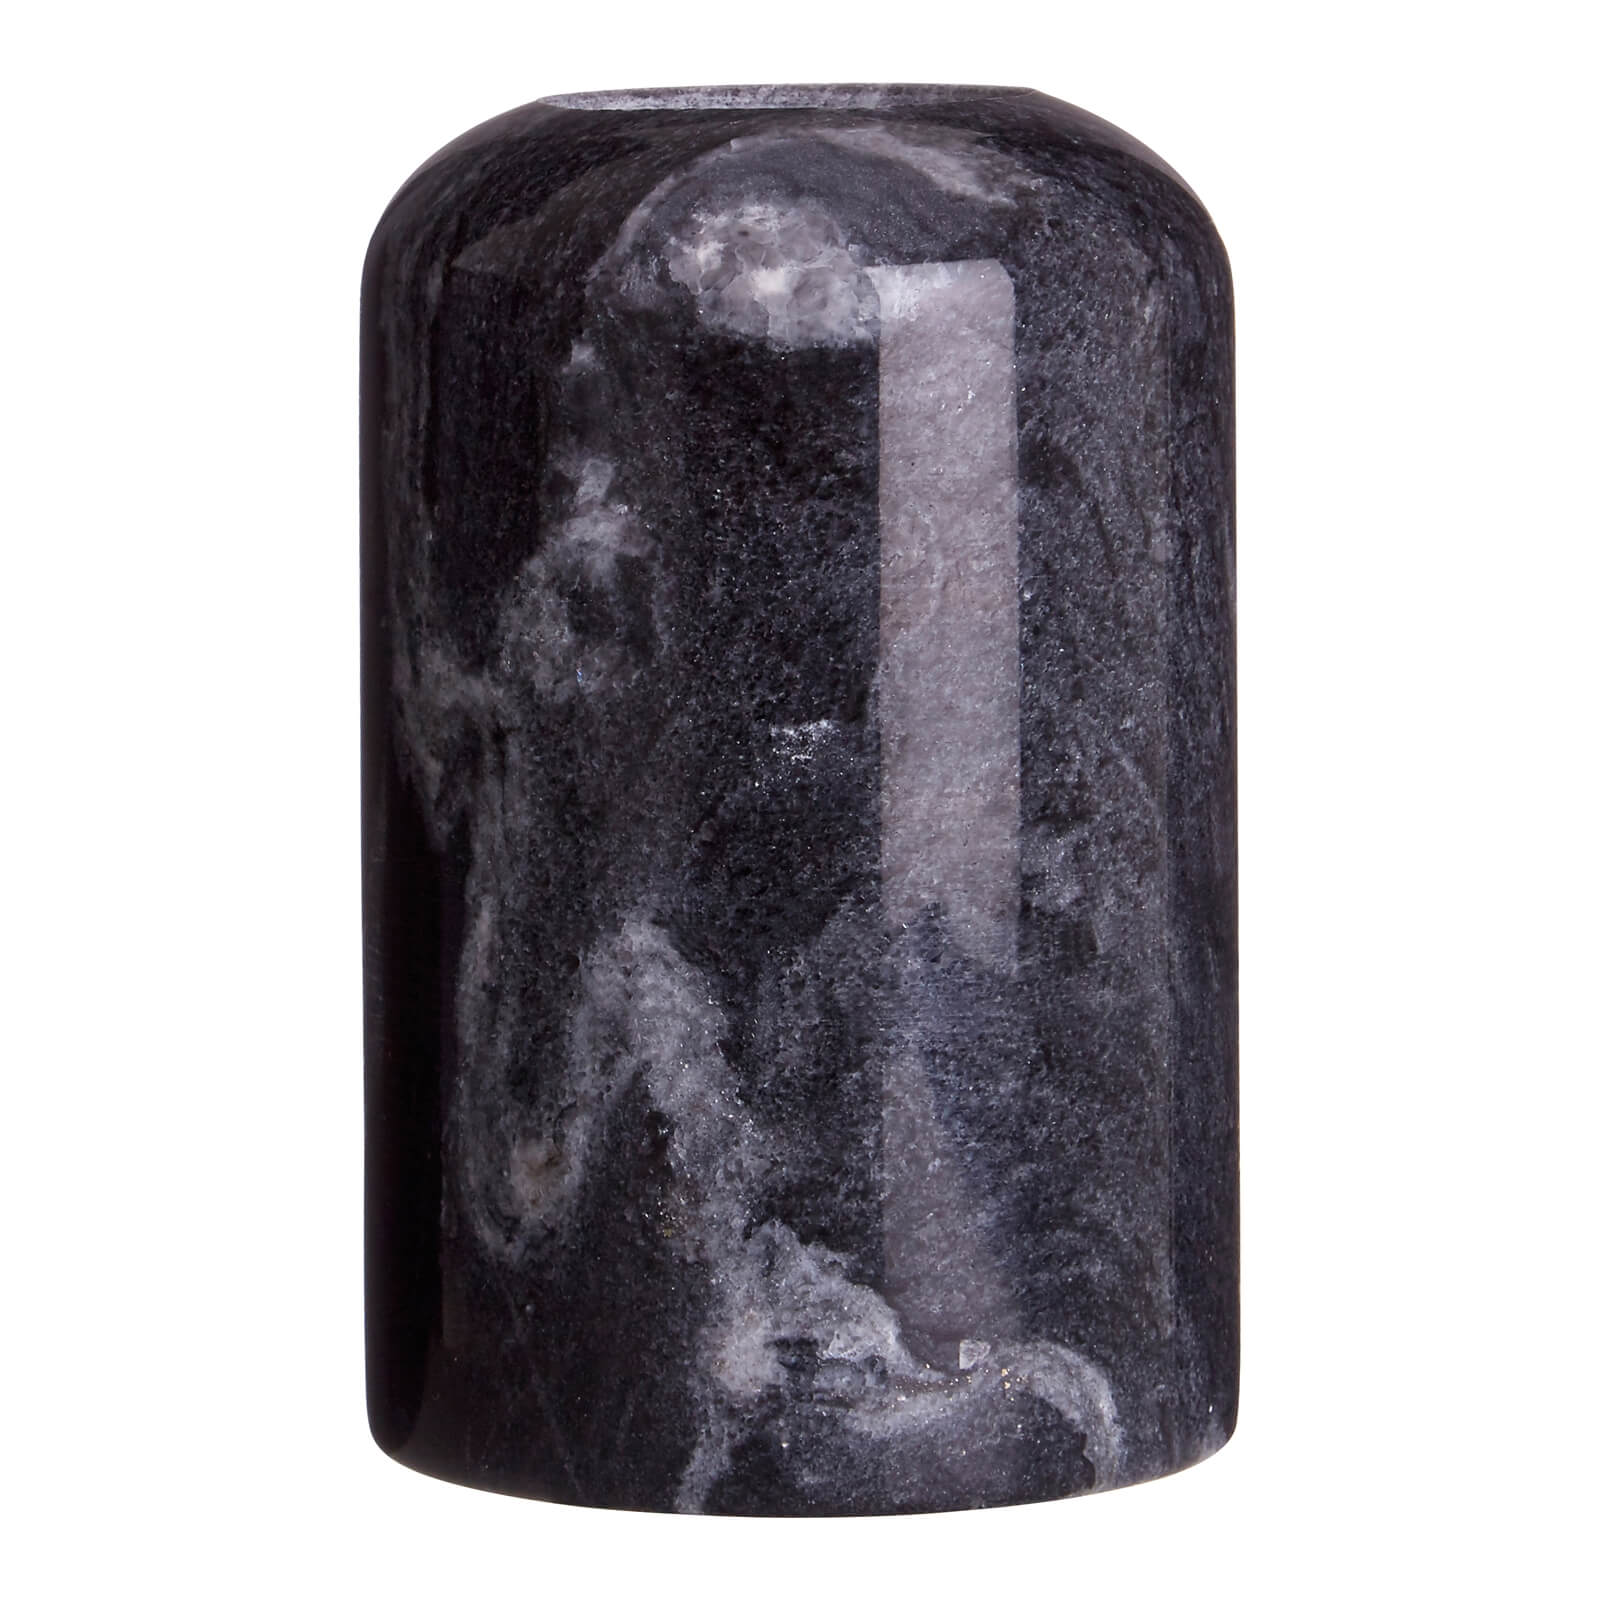 Monty Black Marble Candle Holder - Small